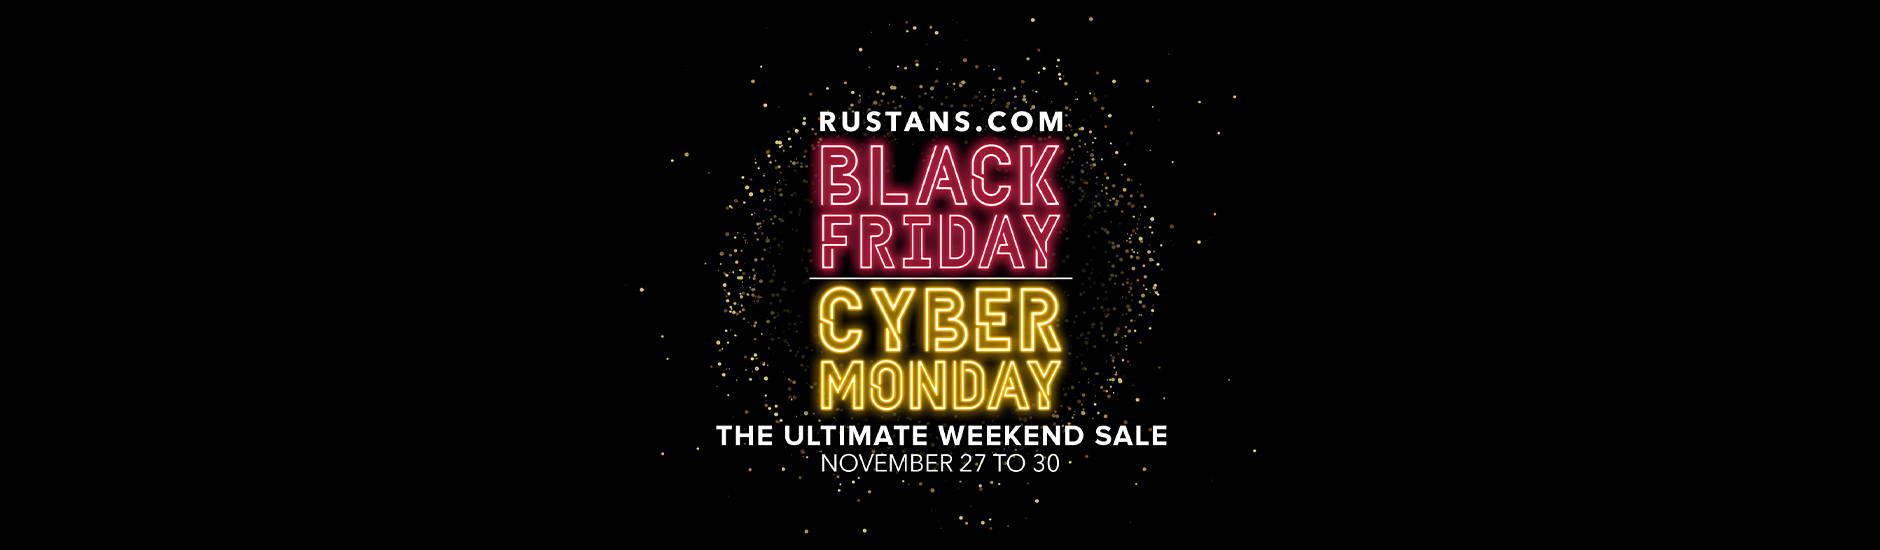 The Ultimate Four-Day Holiday Sale is Coming at Rustans.com